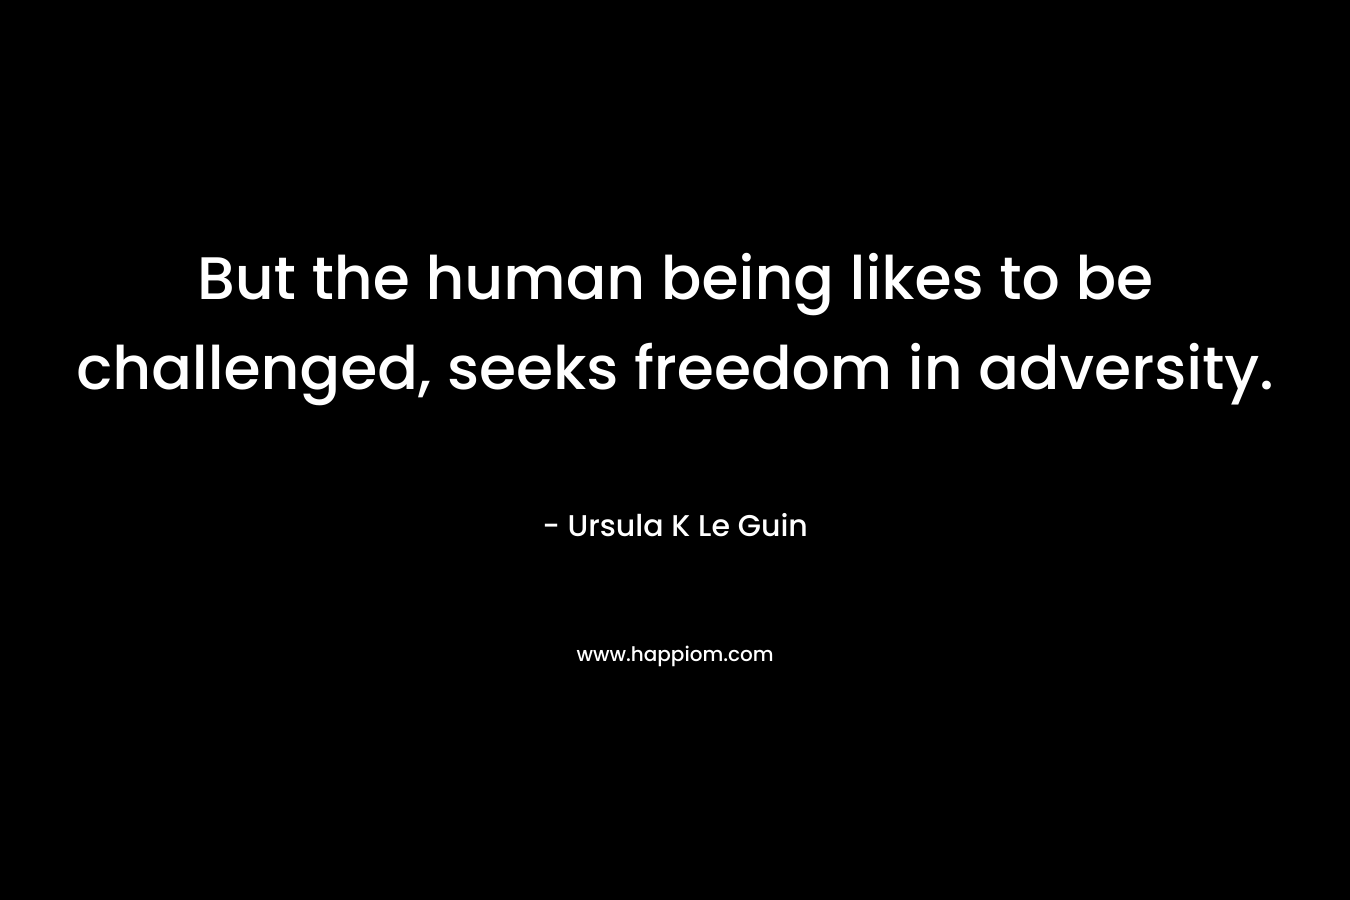 But the human being likes to be challenged, seeks freedom in adversity. – Ursula K Le Guin